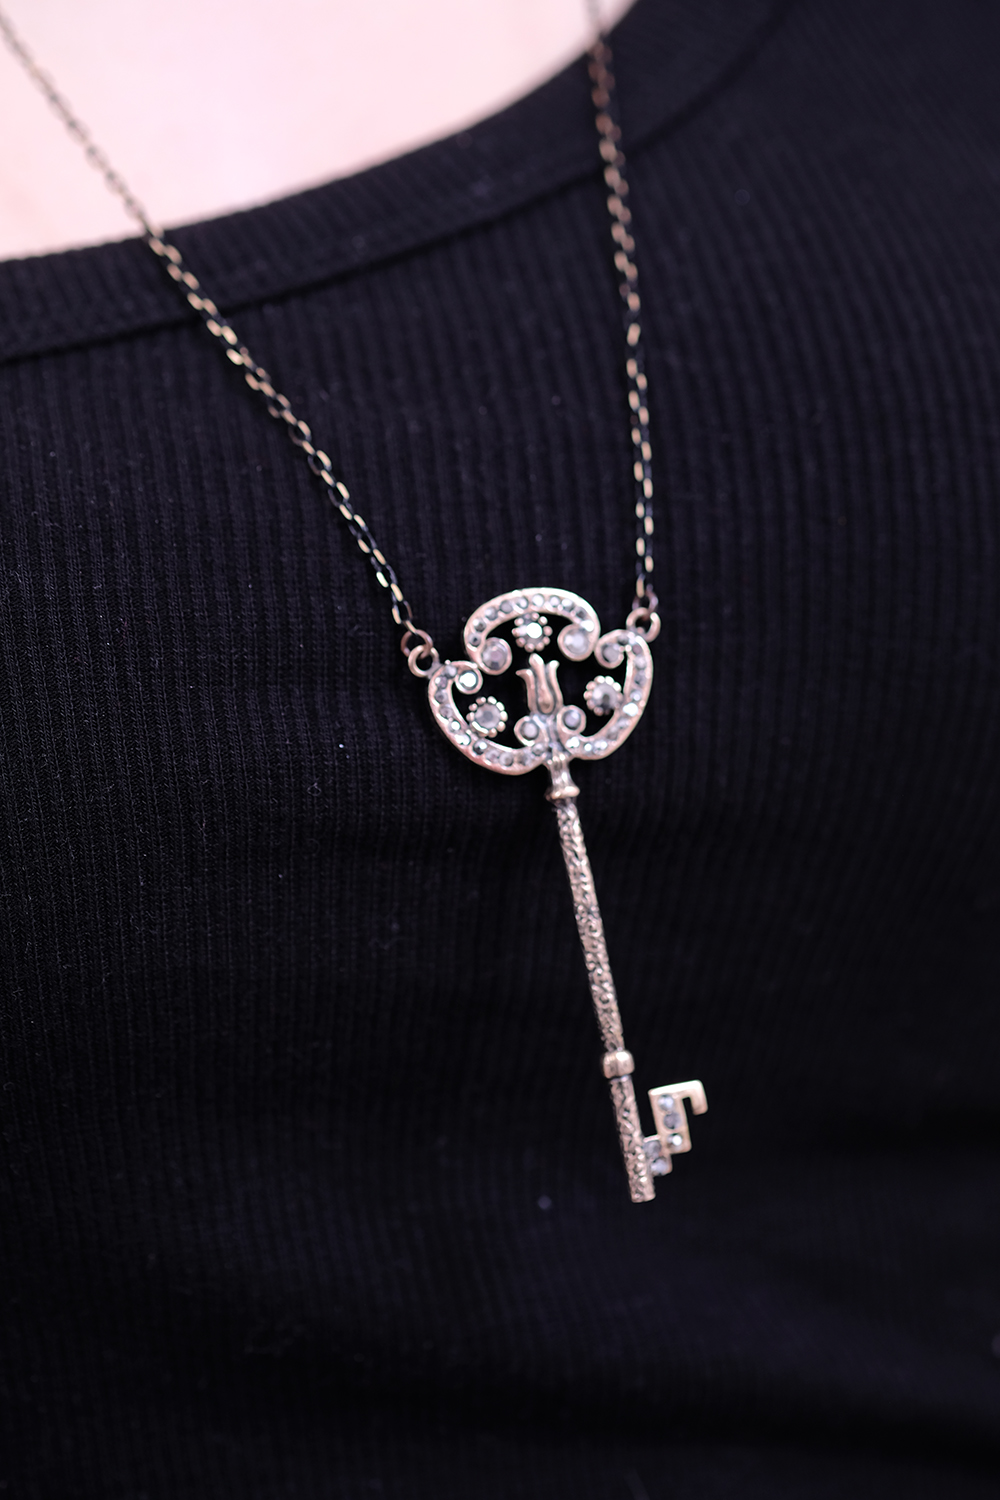 INDEPENDENCE Necklace